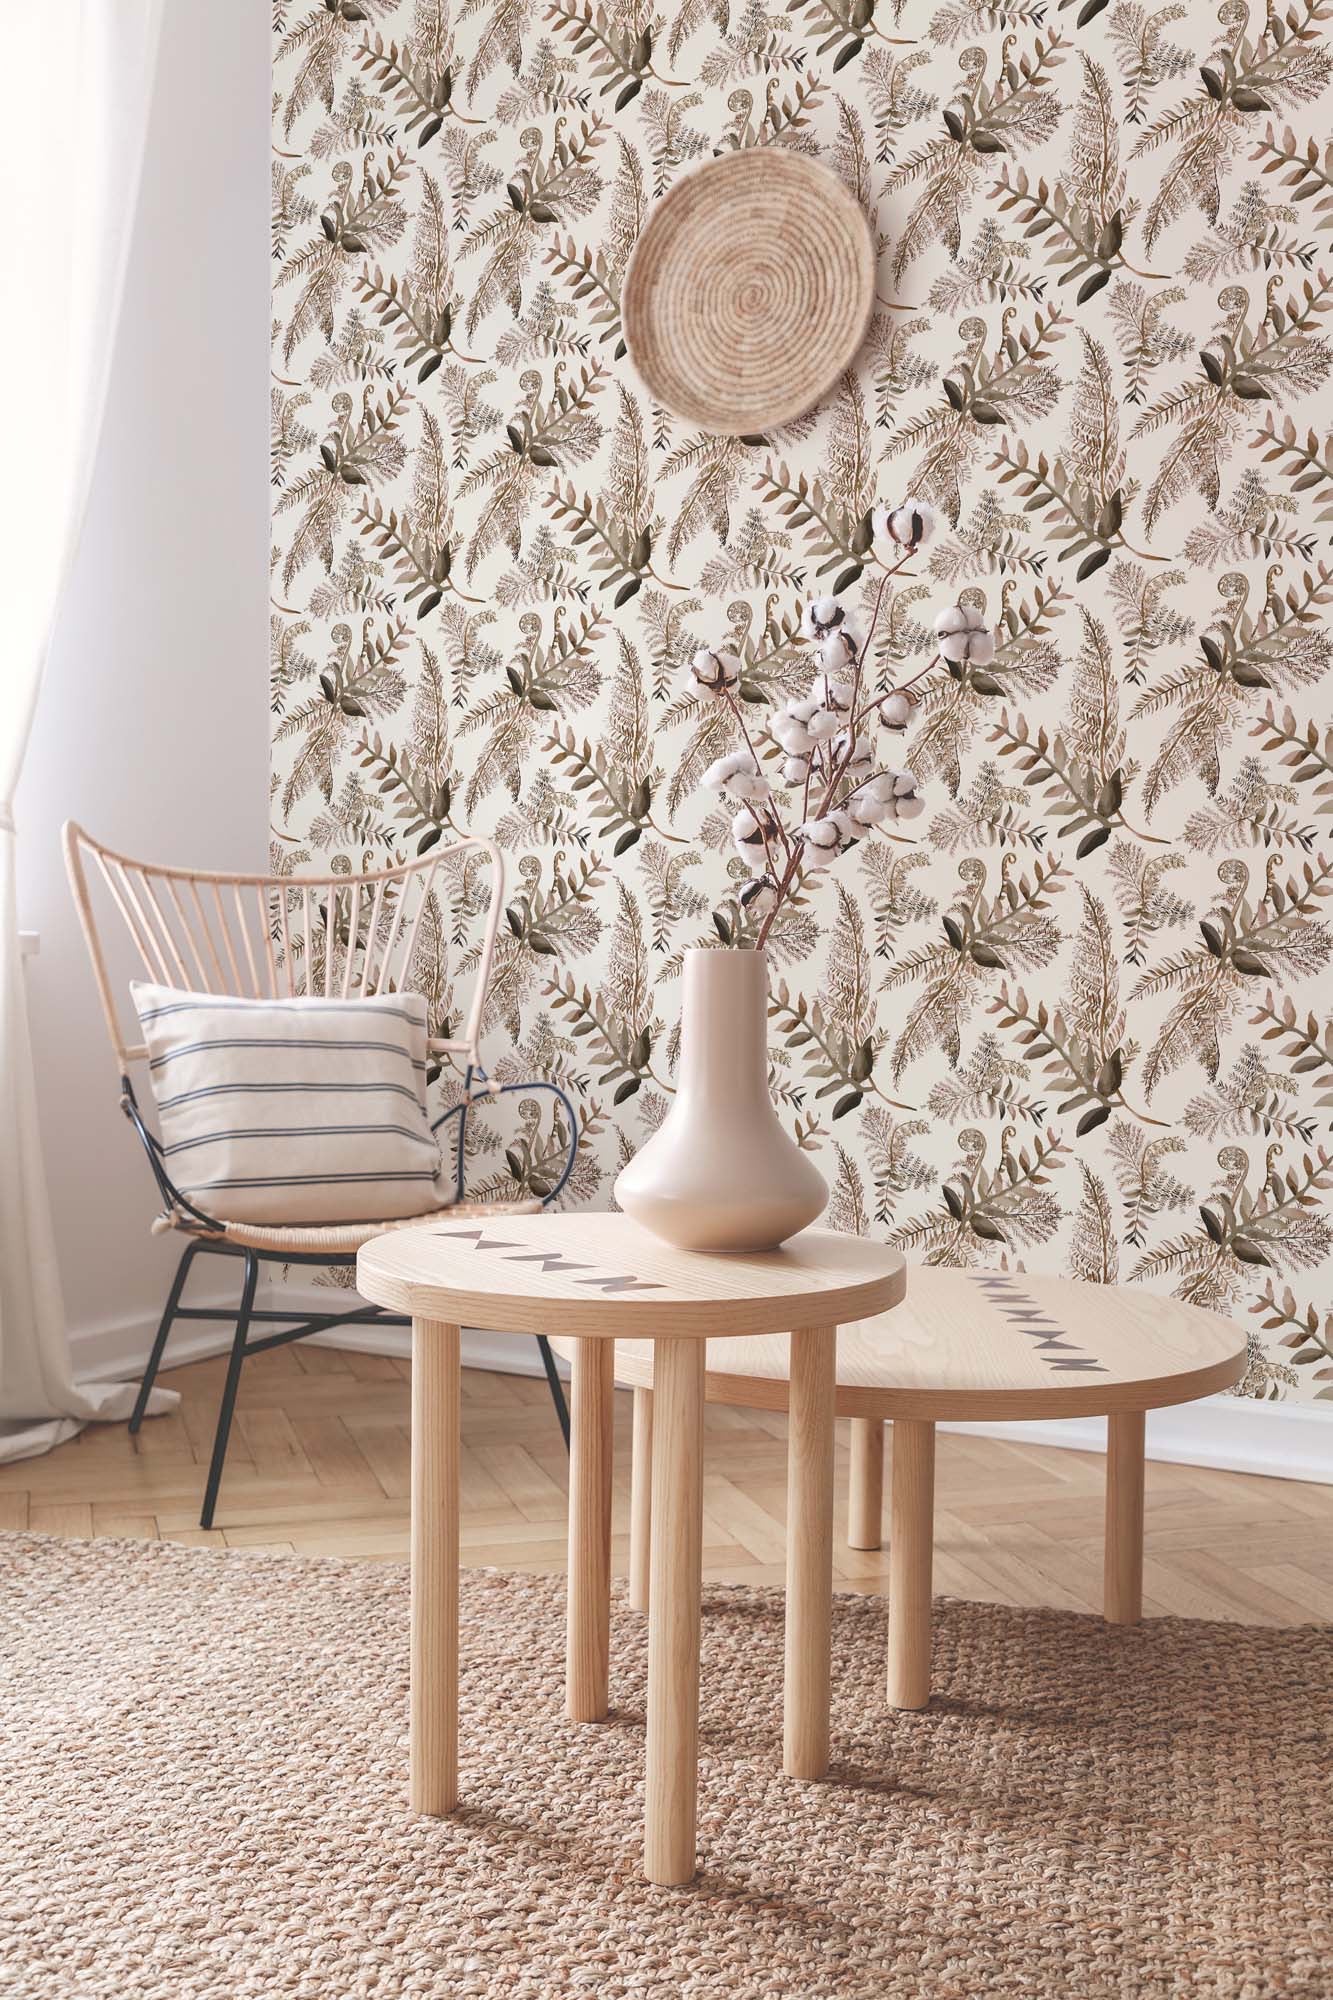 Camper or Home Wallpaper - Neutral Fern Peel and Stick or Traditional Wallpaper